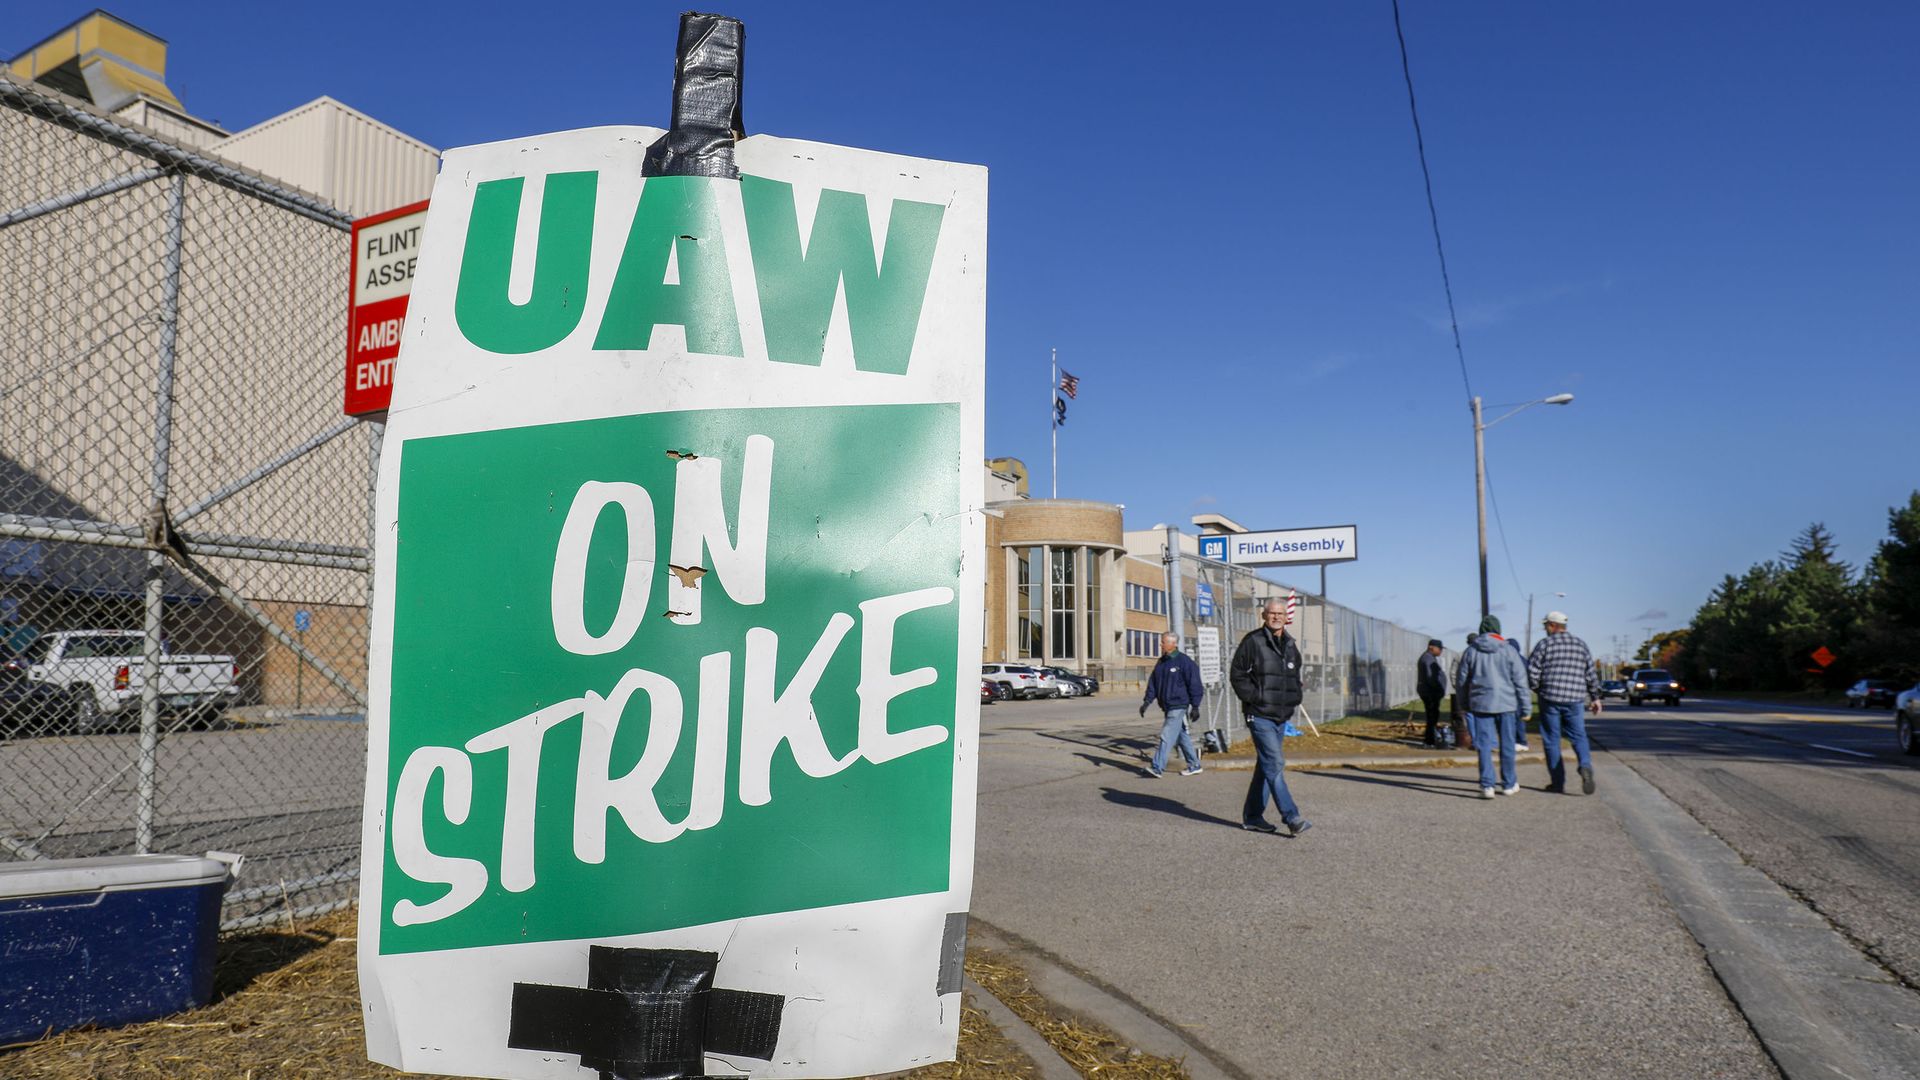 This image shows a sign that reads "UAW on strike" 